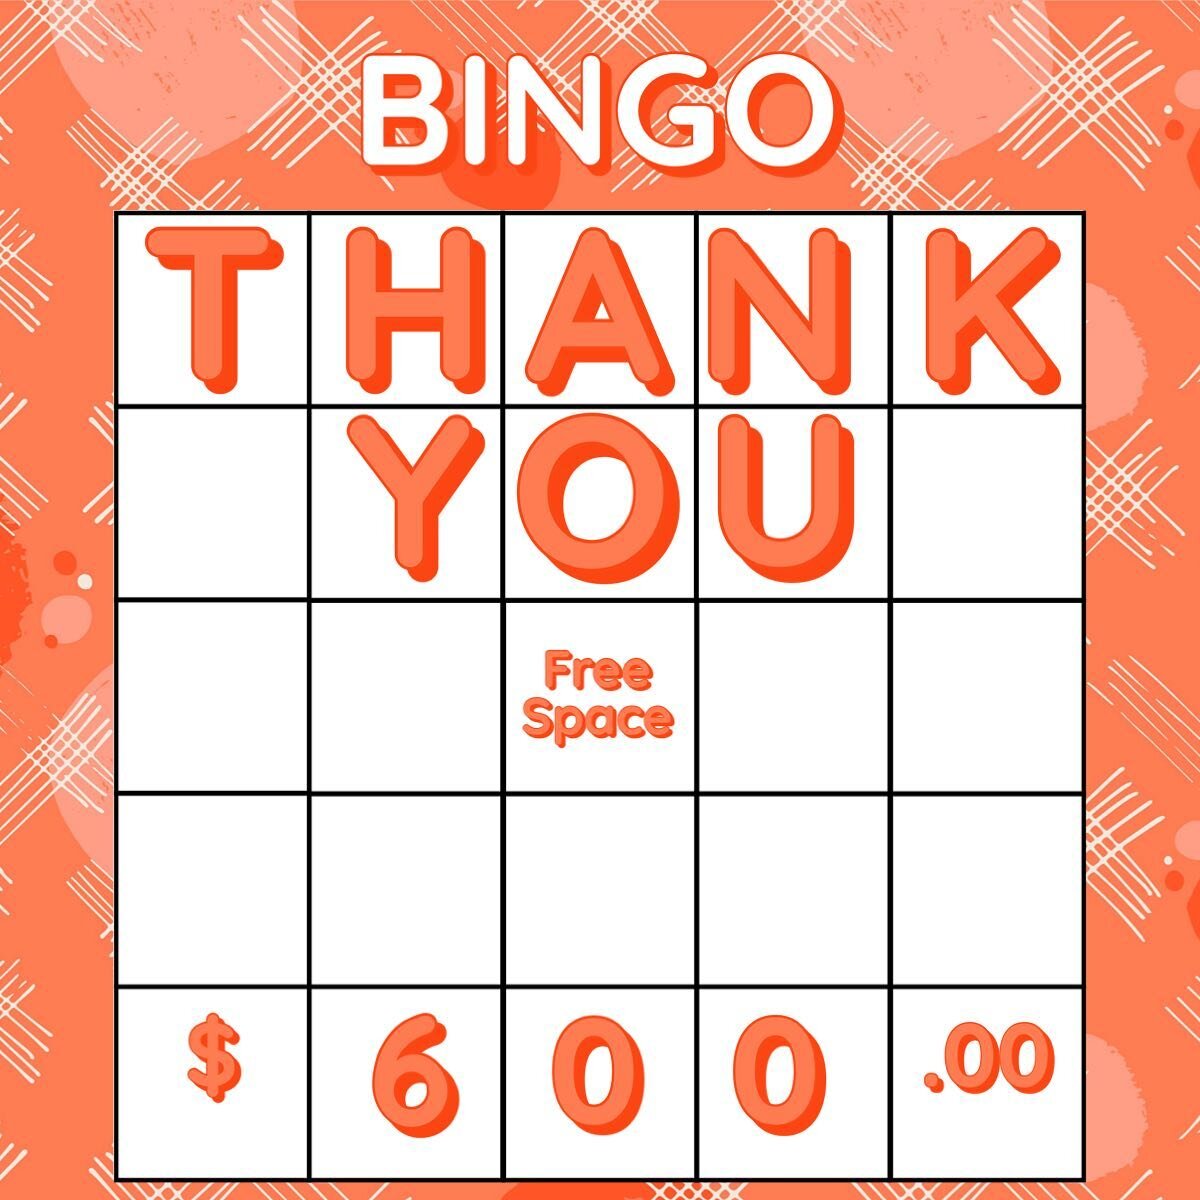 #sunday #sundayfunday #bingo 
Great way to finish a weekend if fundraising with $600 being raised at BINGO 
🏠 @flashintoronto 
Hosted by Empress @rachellevalois_ and Emperor @davidvalois_ 

All proceeds to benefit Reign 36 charities of choice @toron